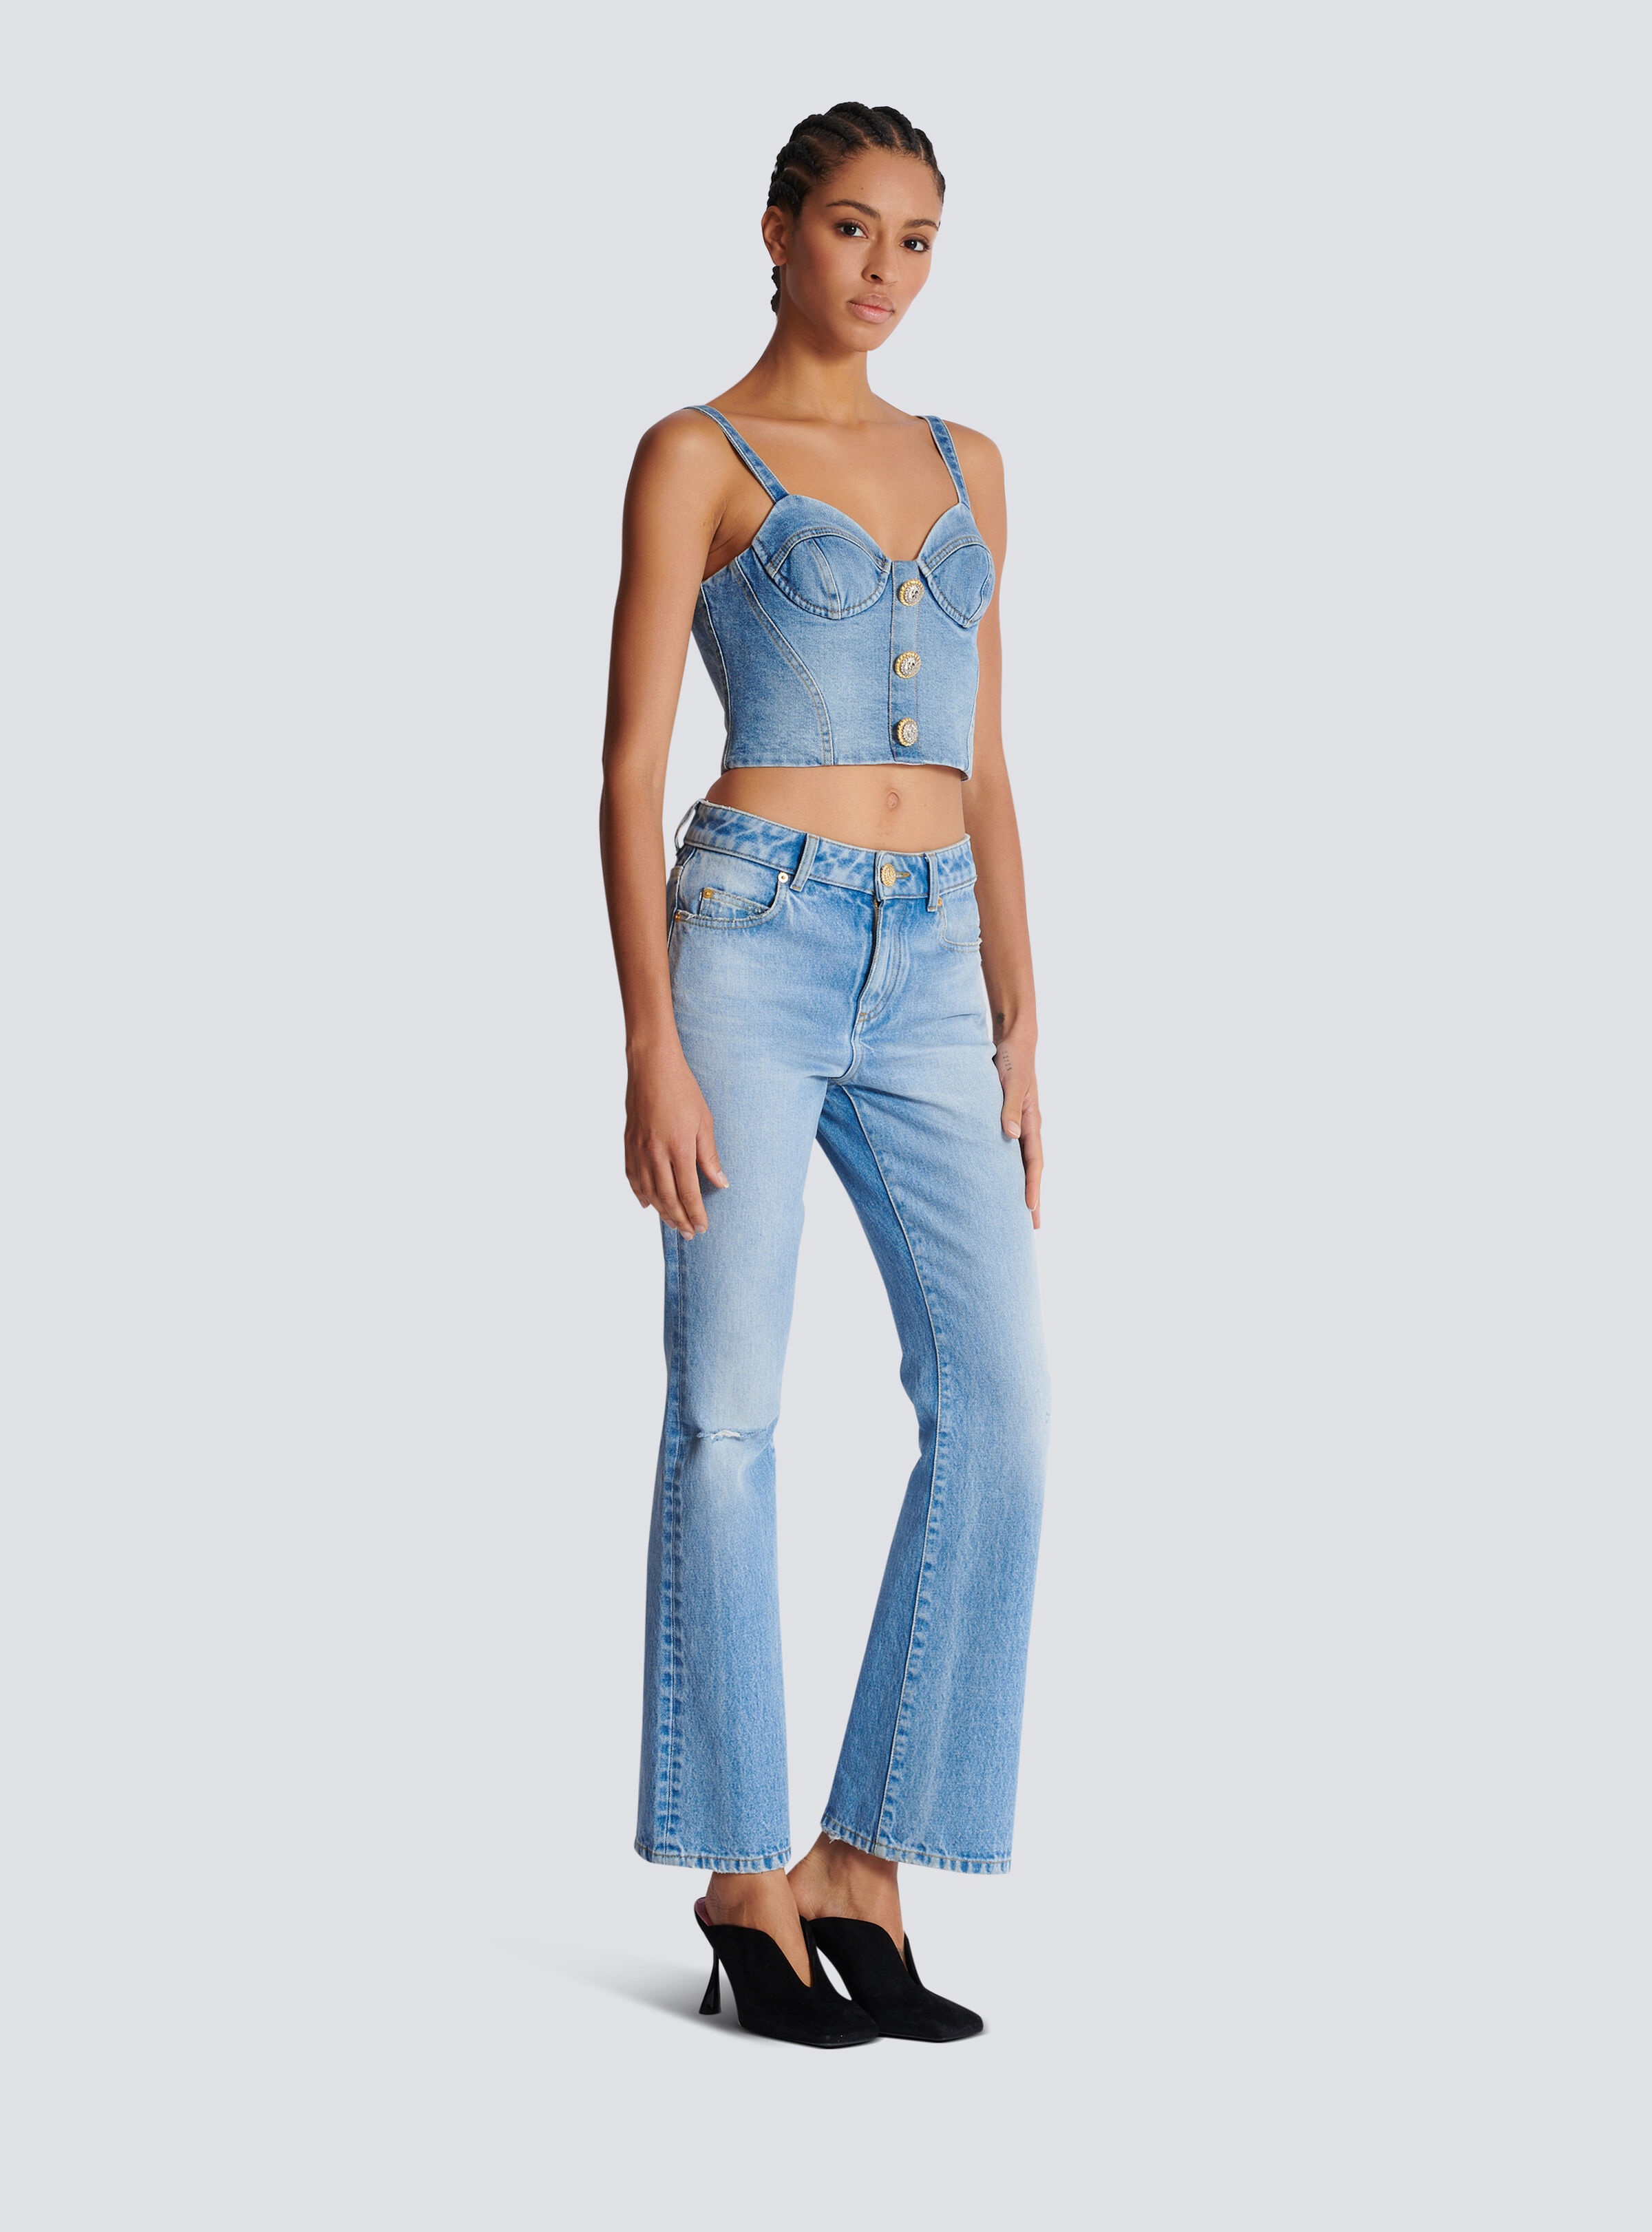 Denim top with thin straps - 3